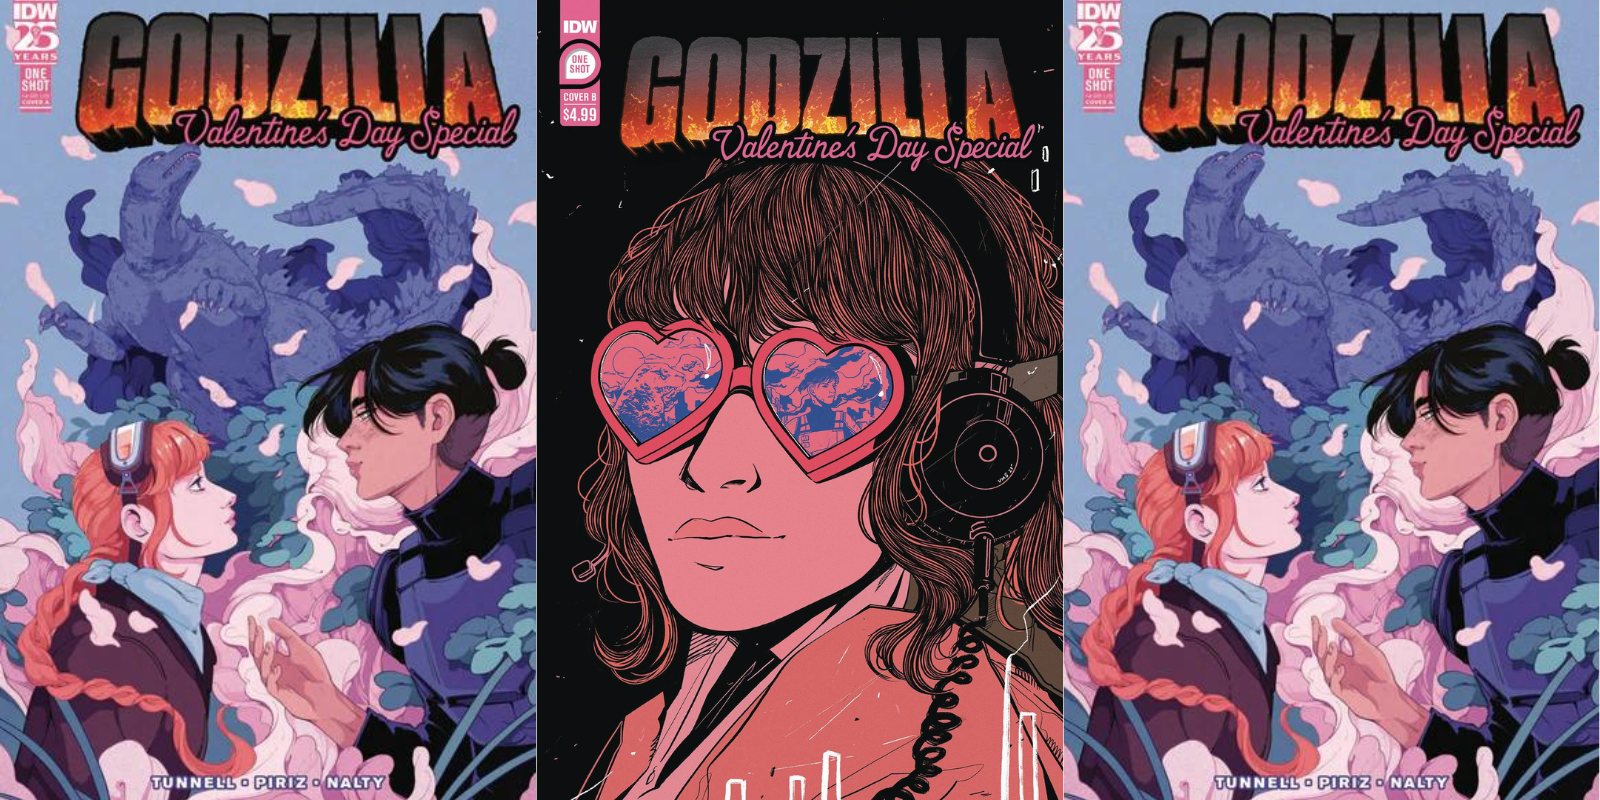 The 'Godzilla Valentine's Day Special' #1 cover art, by Dani Pendergast and M. Smith, is in shades of black, blue, and blush pink. In one cover a sapphic couple make heart eyes with each other while Godzilla is in the background. In the second cover a brunette femme has heart shaped sunglasses and we can see Godzilla in the reflection.